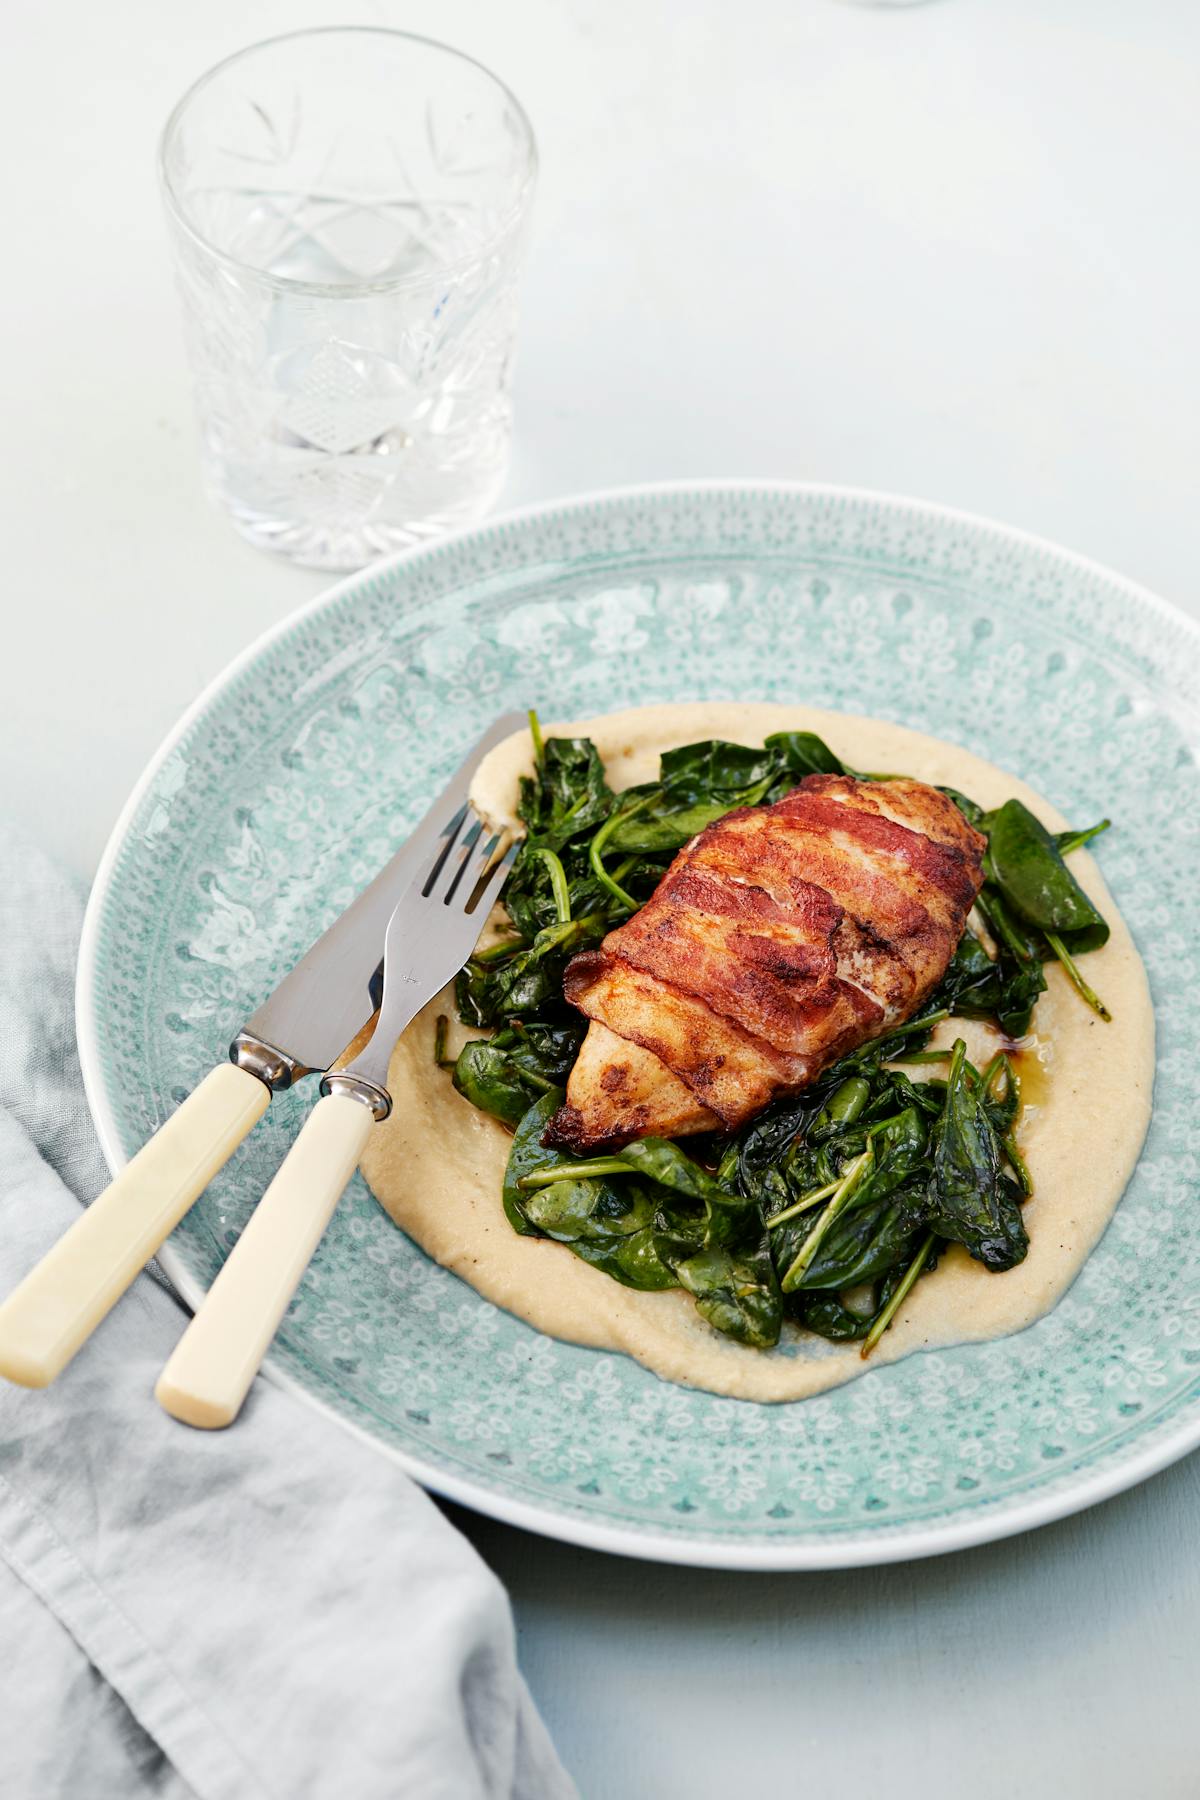 Bacon-wrapped chicken breast with cauliflower purée